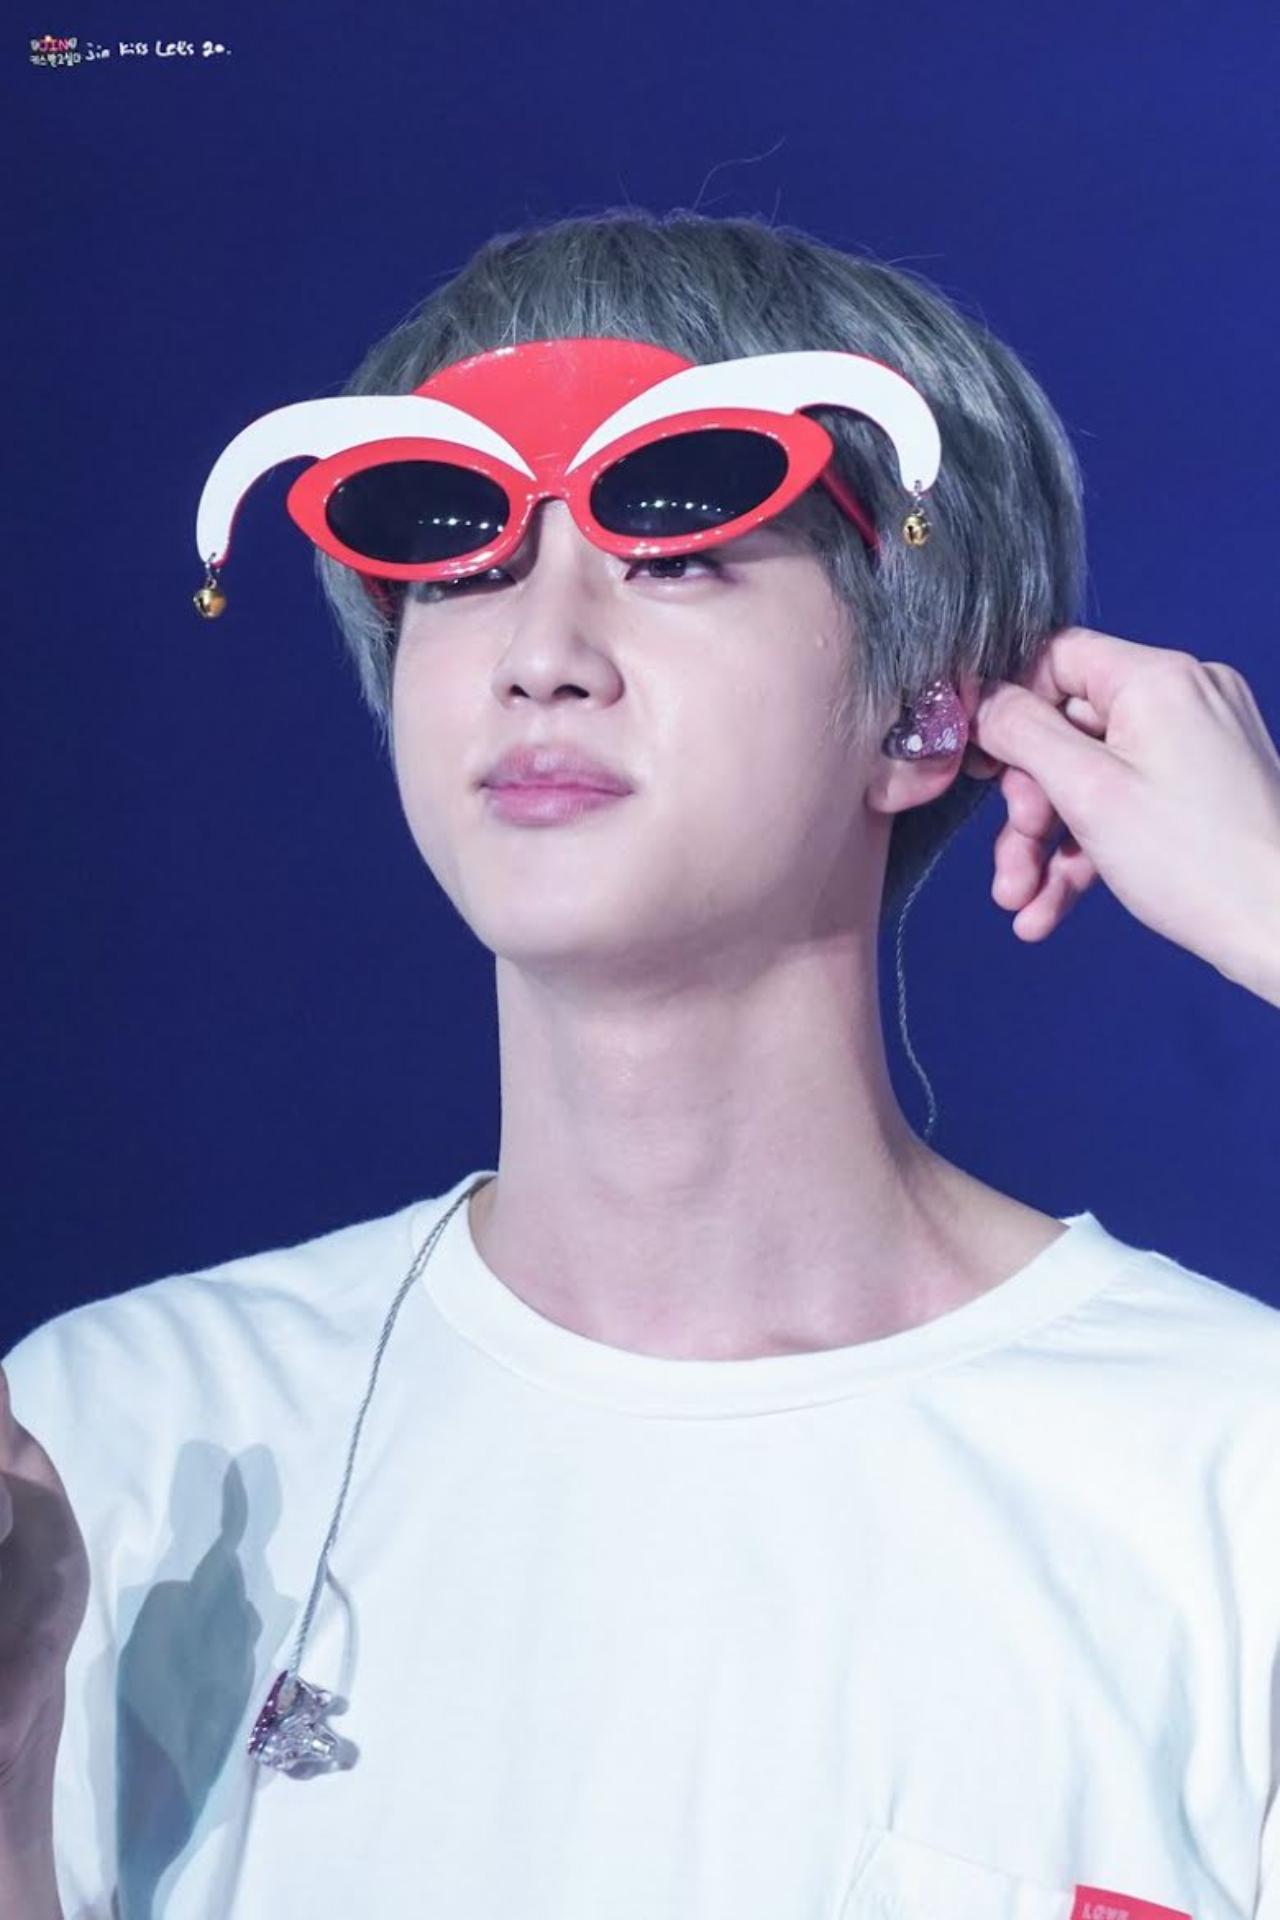 The man may be a millionaire but he would still choose this joker-themed pair of sunglasses onstage, just to make ARMY laugh